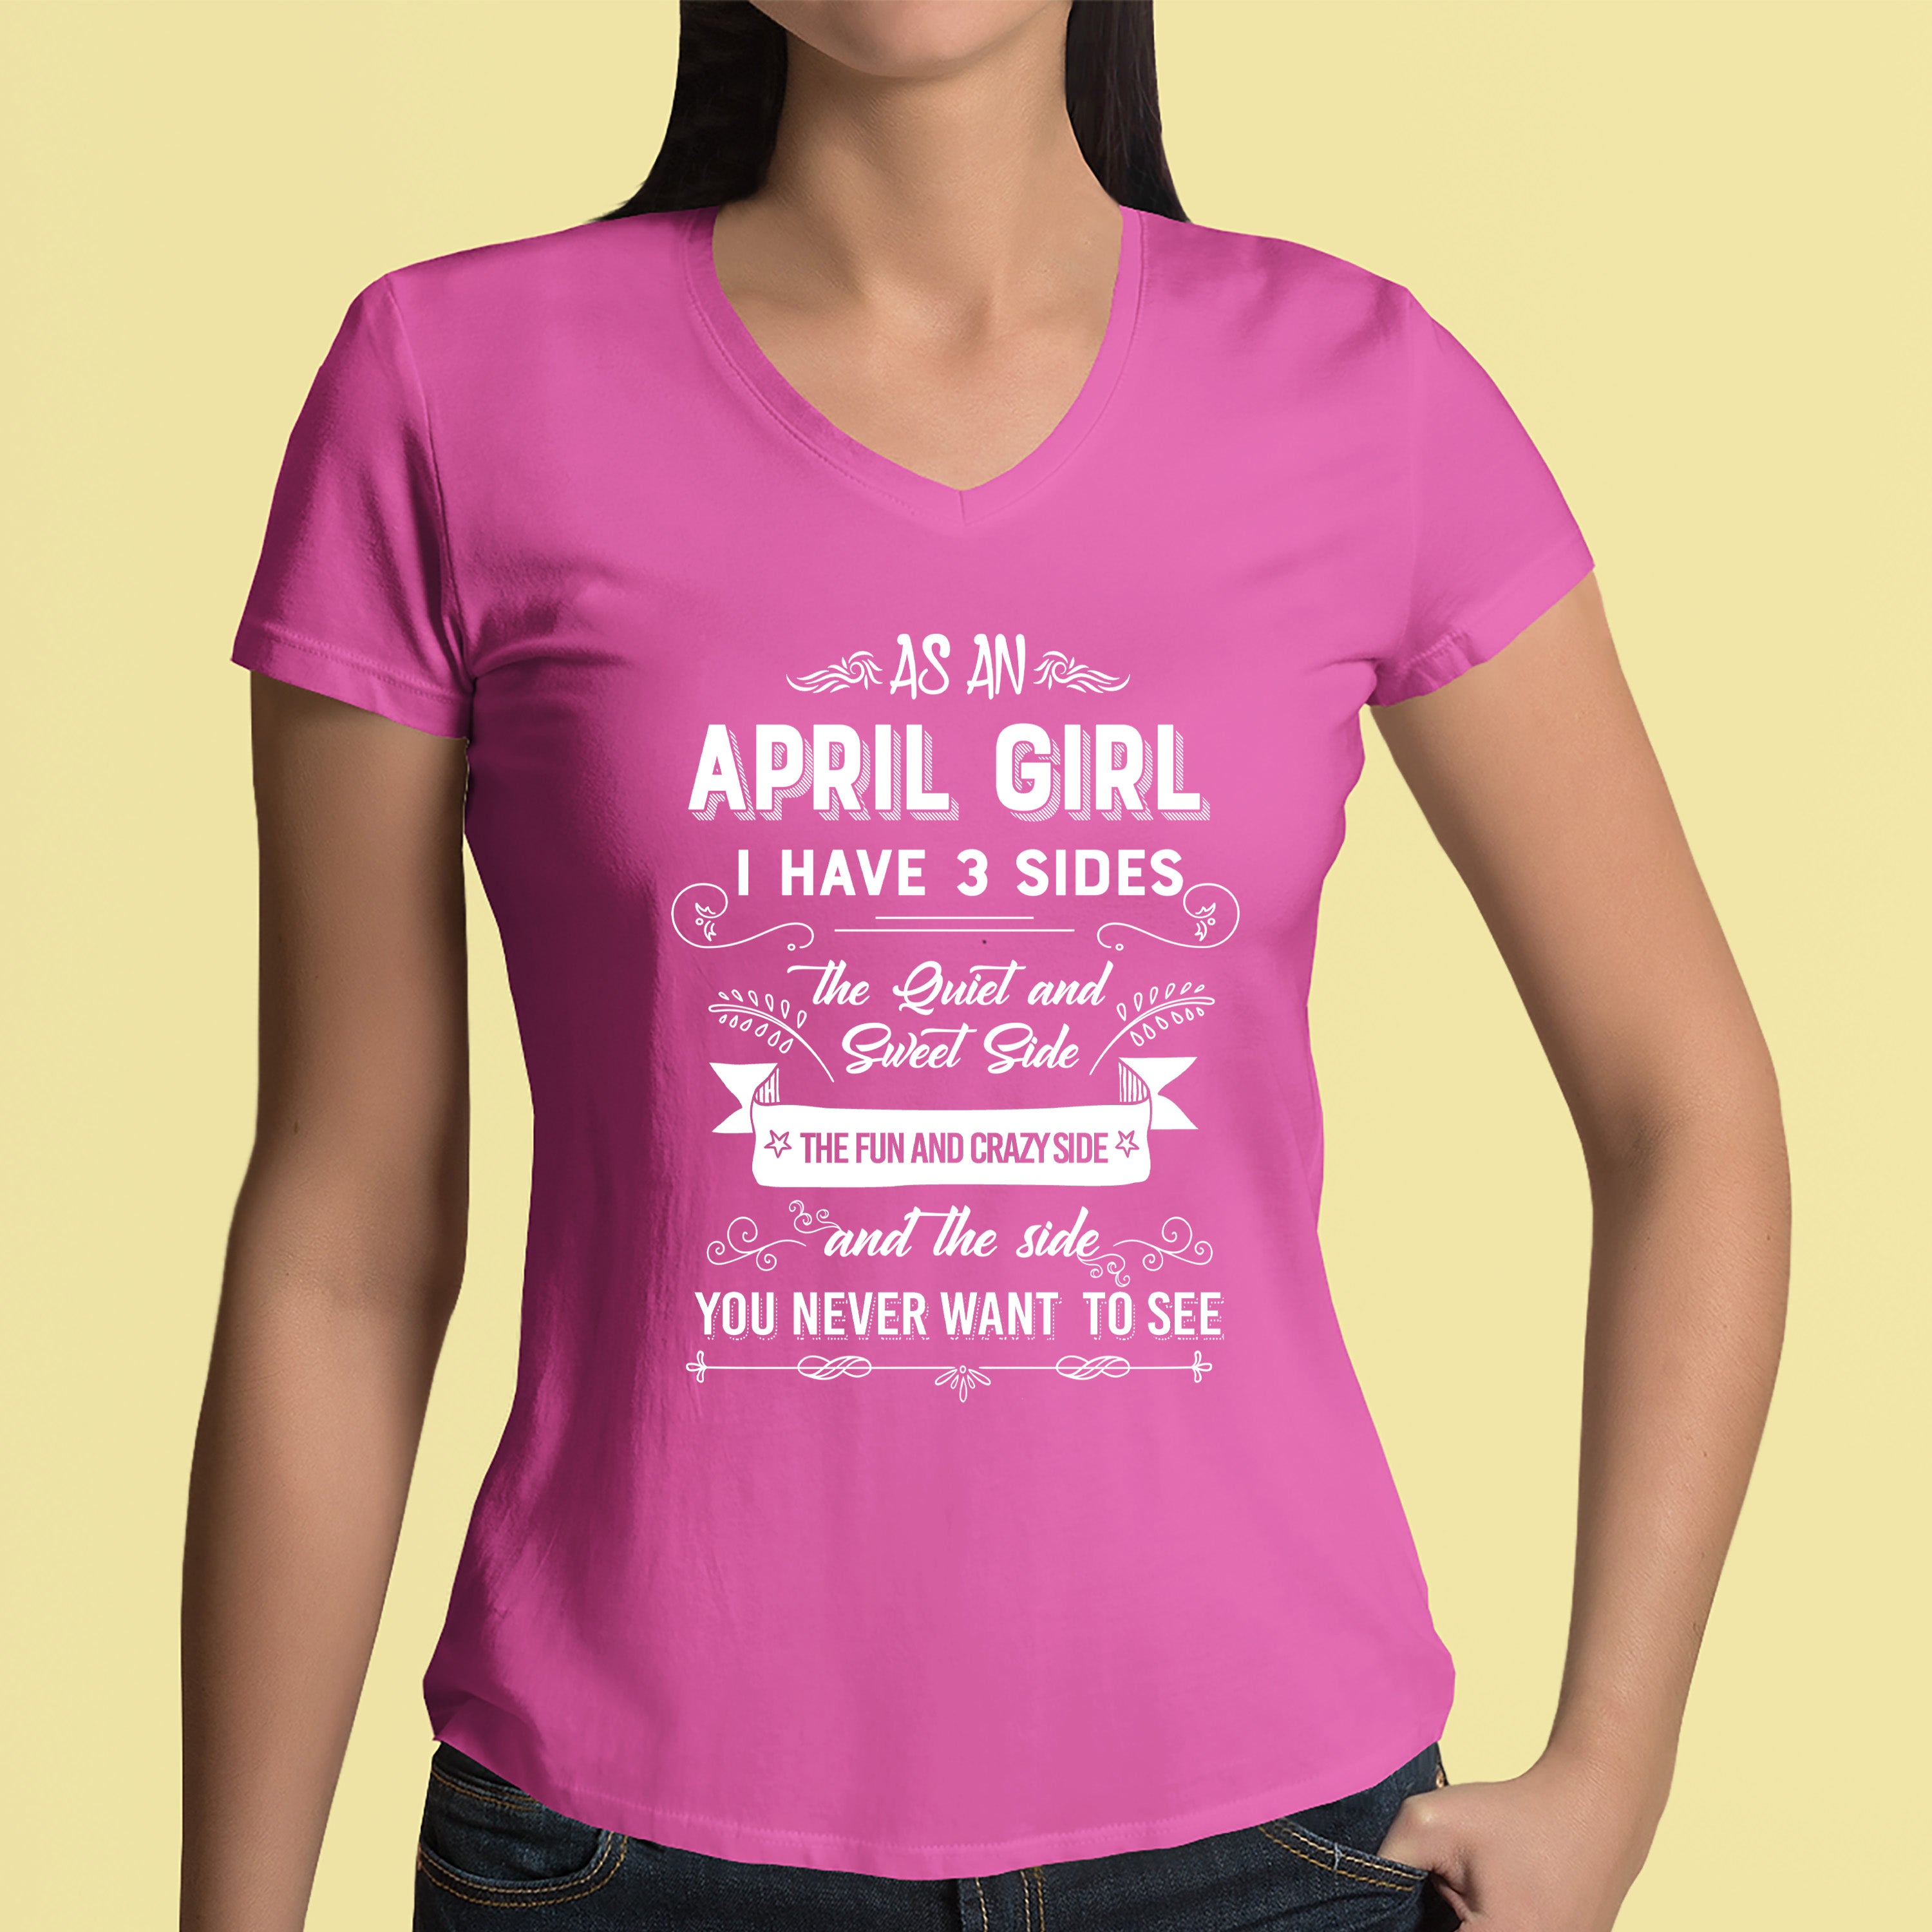 "As a April Girl I have 3 Sides"